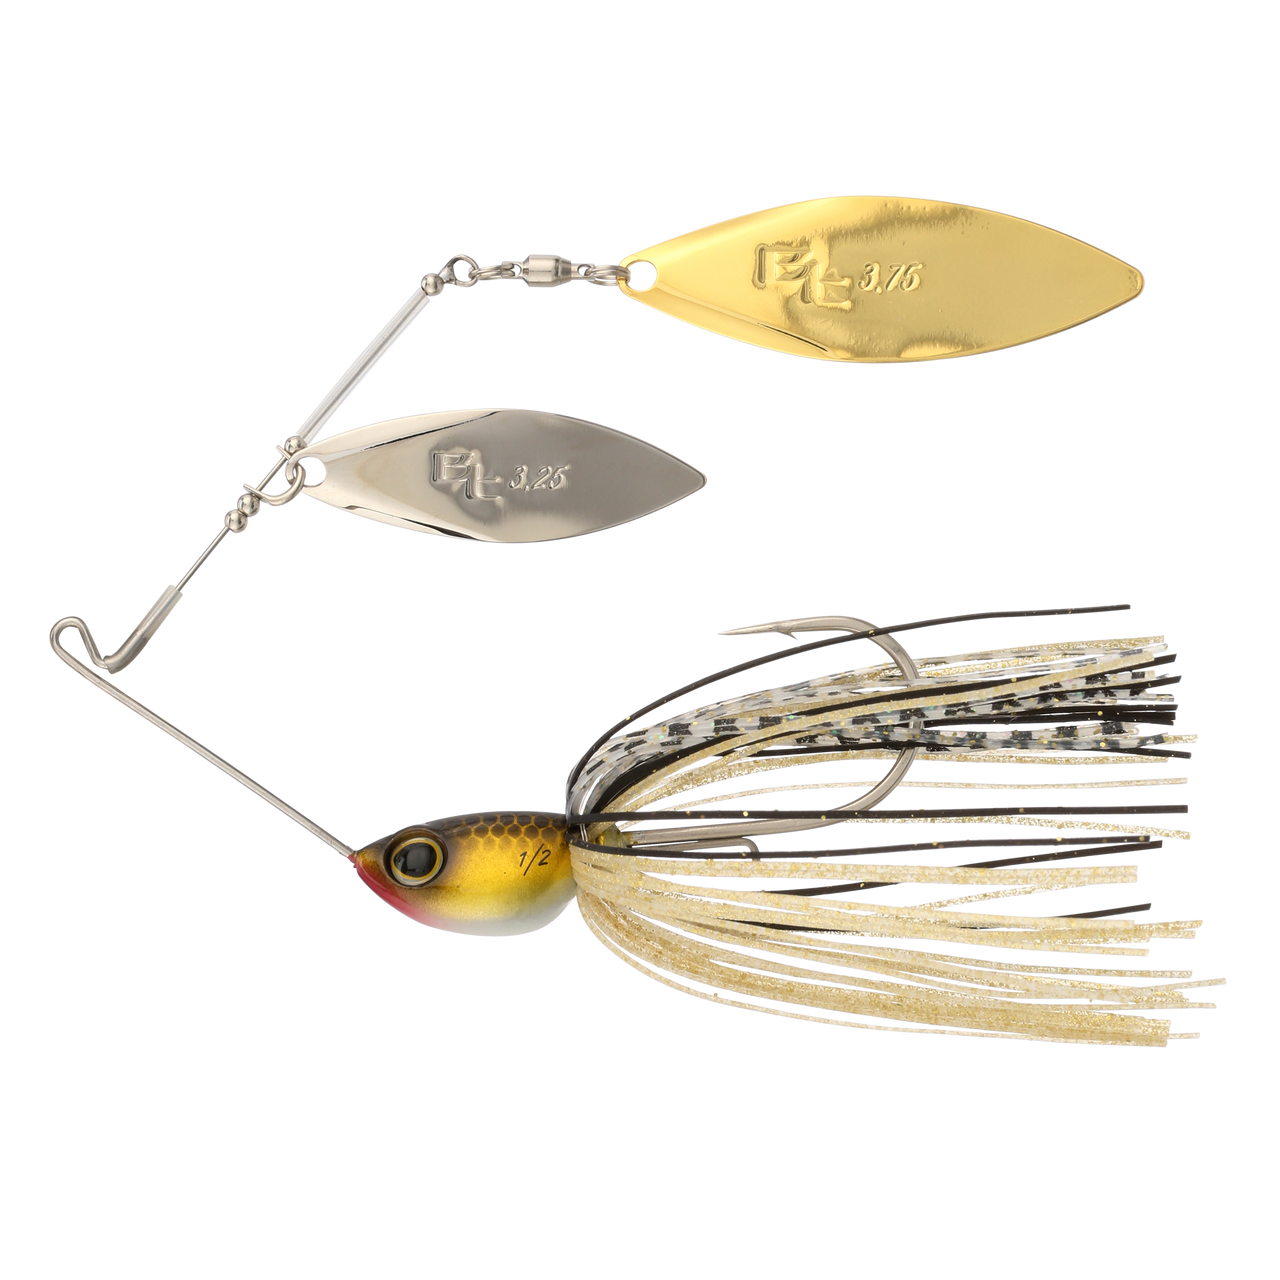 https://cdn11.bigcommerce.com/s-i6ykqoitnd/images/stencil/1280x1280/products/11579/64539/FishShimano-SWAGY-DW-BLACK-GOLD-primary__85204.1696449135.png?c=1&imbypass=on